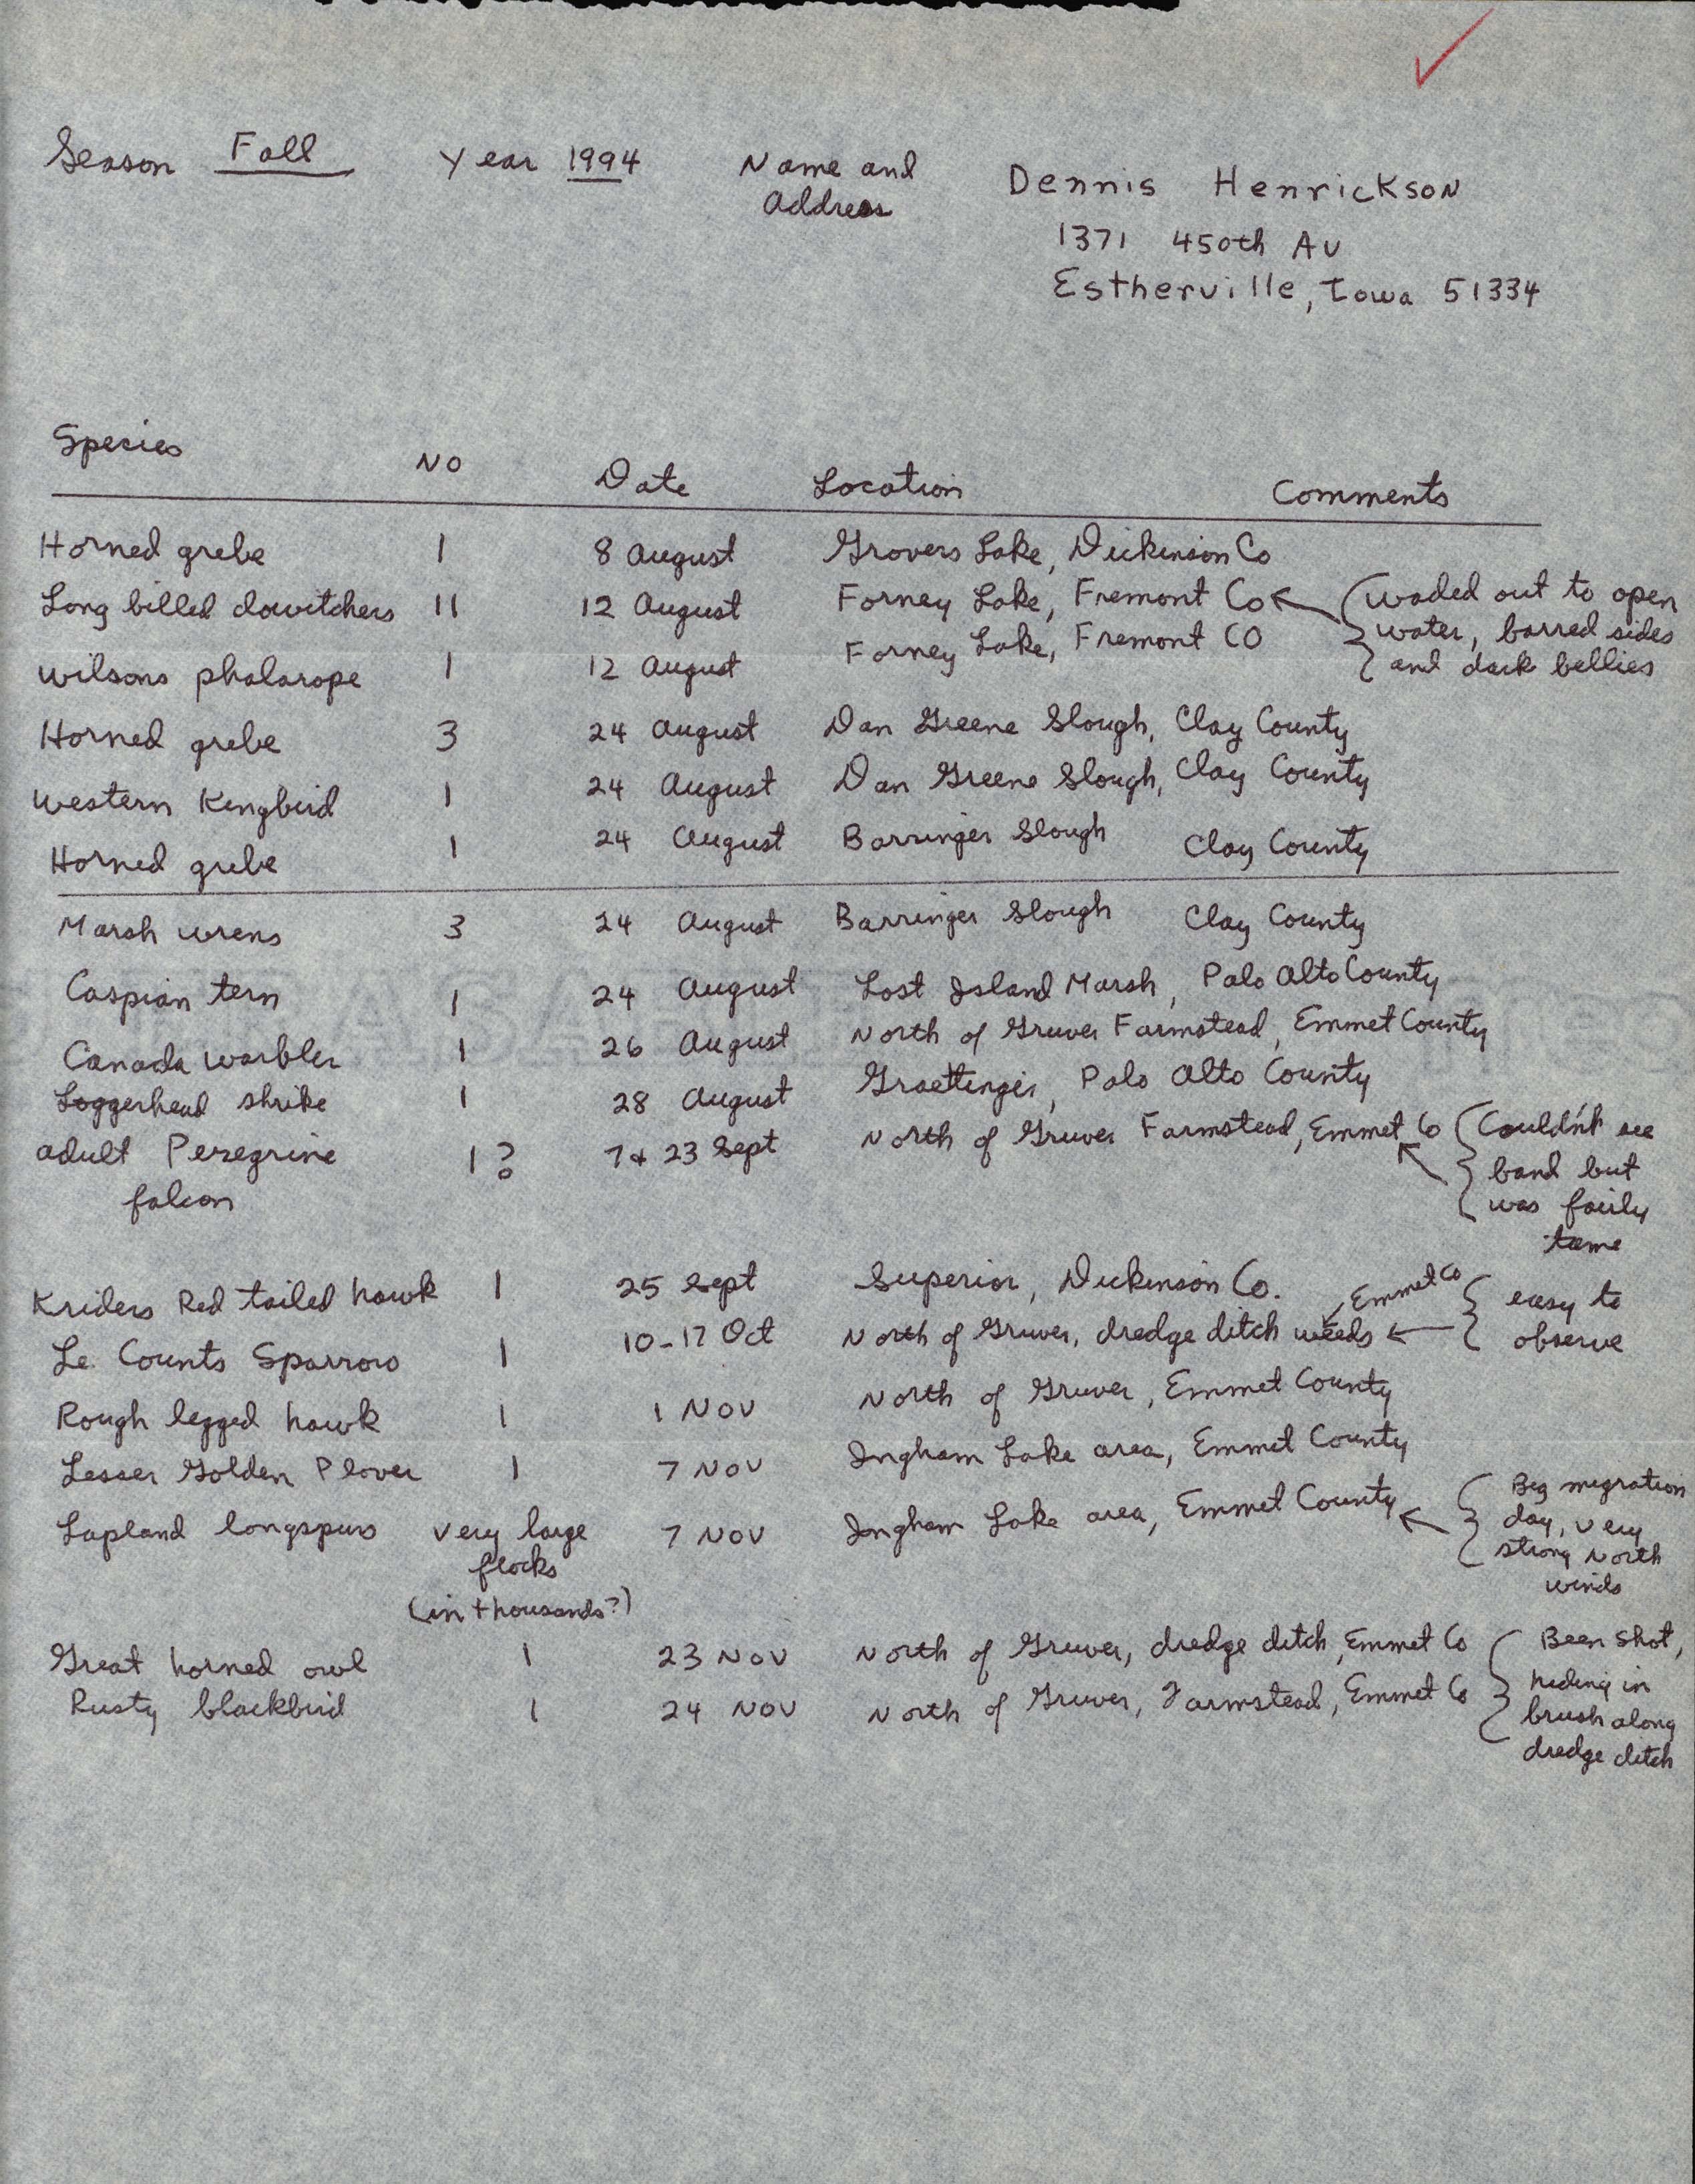 Annotated bird sighting list for fall 1994 compiled by Dennis Henrickson